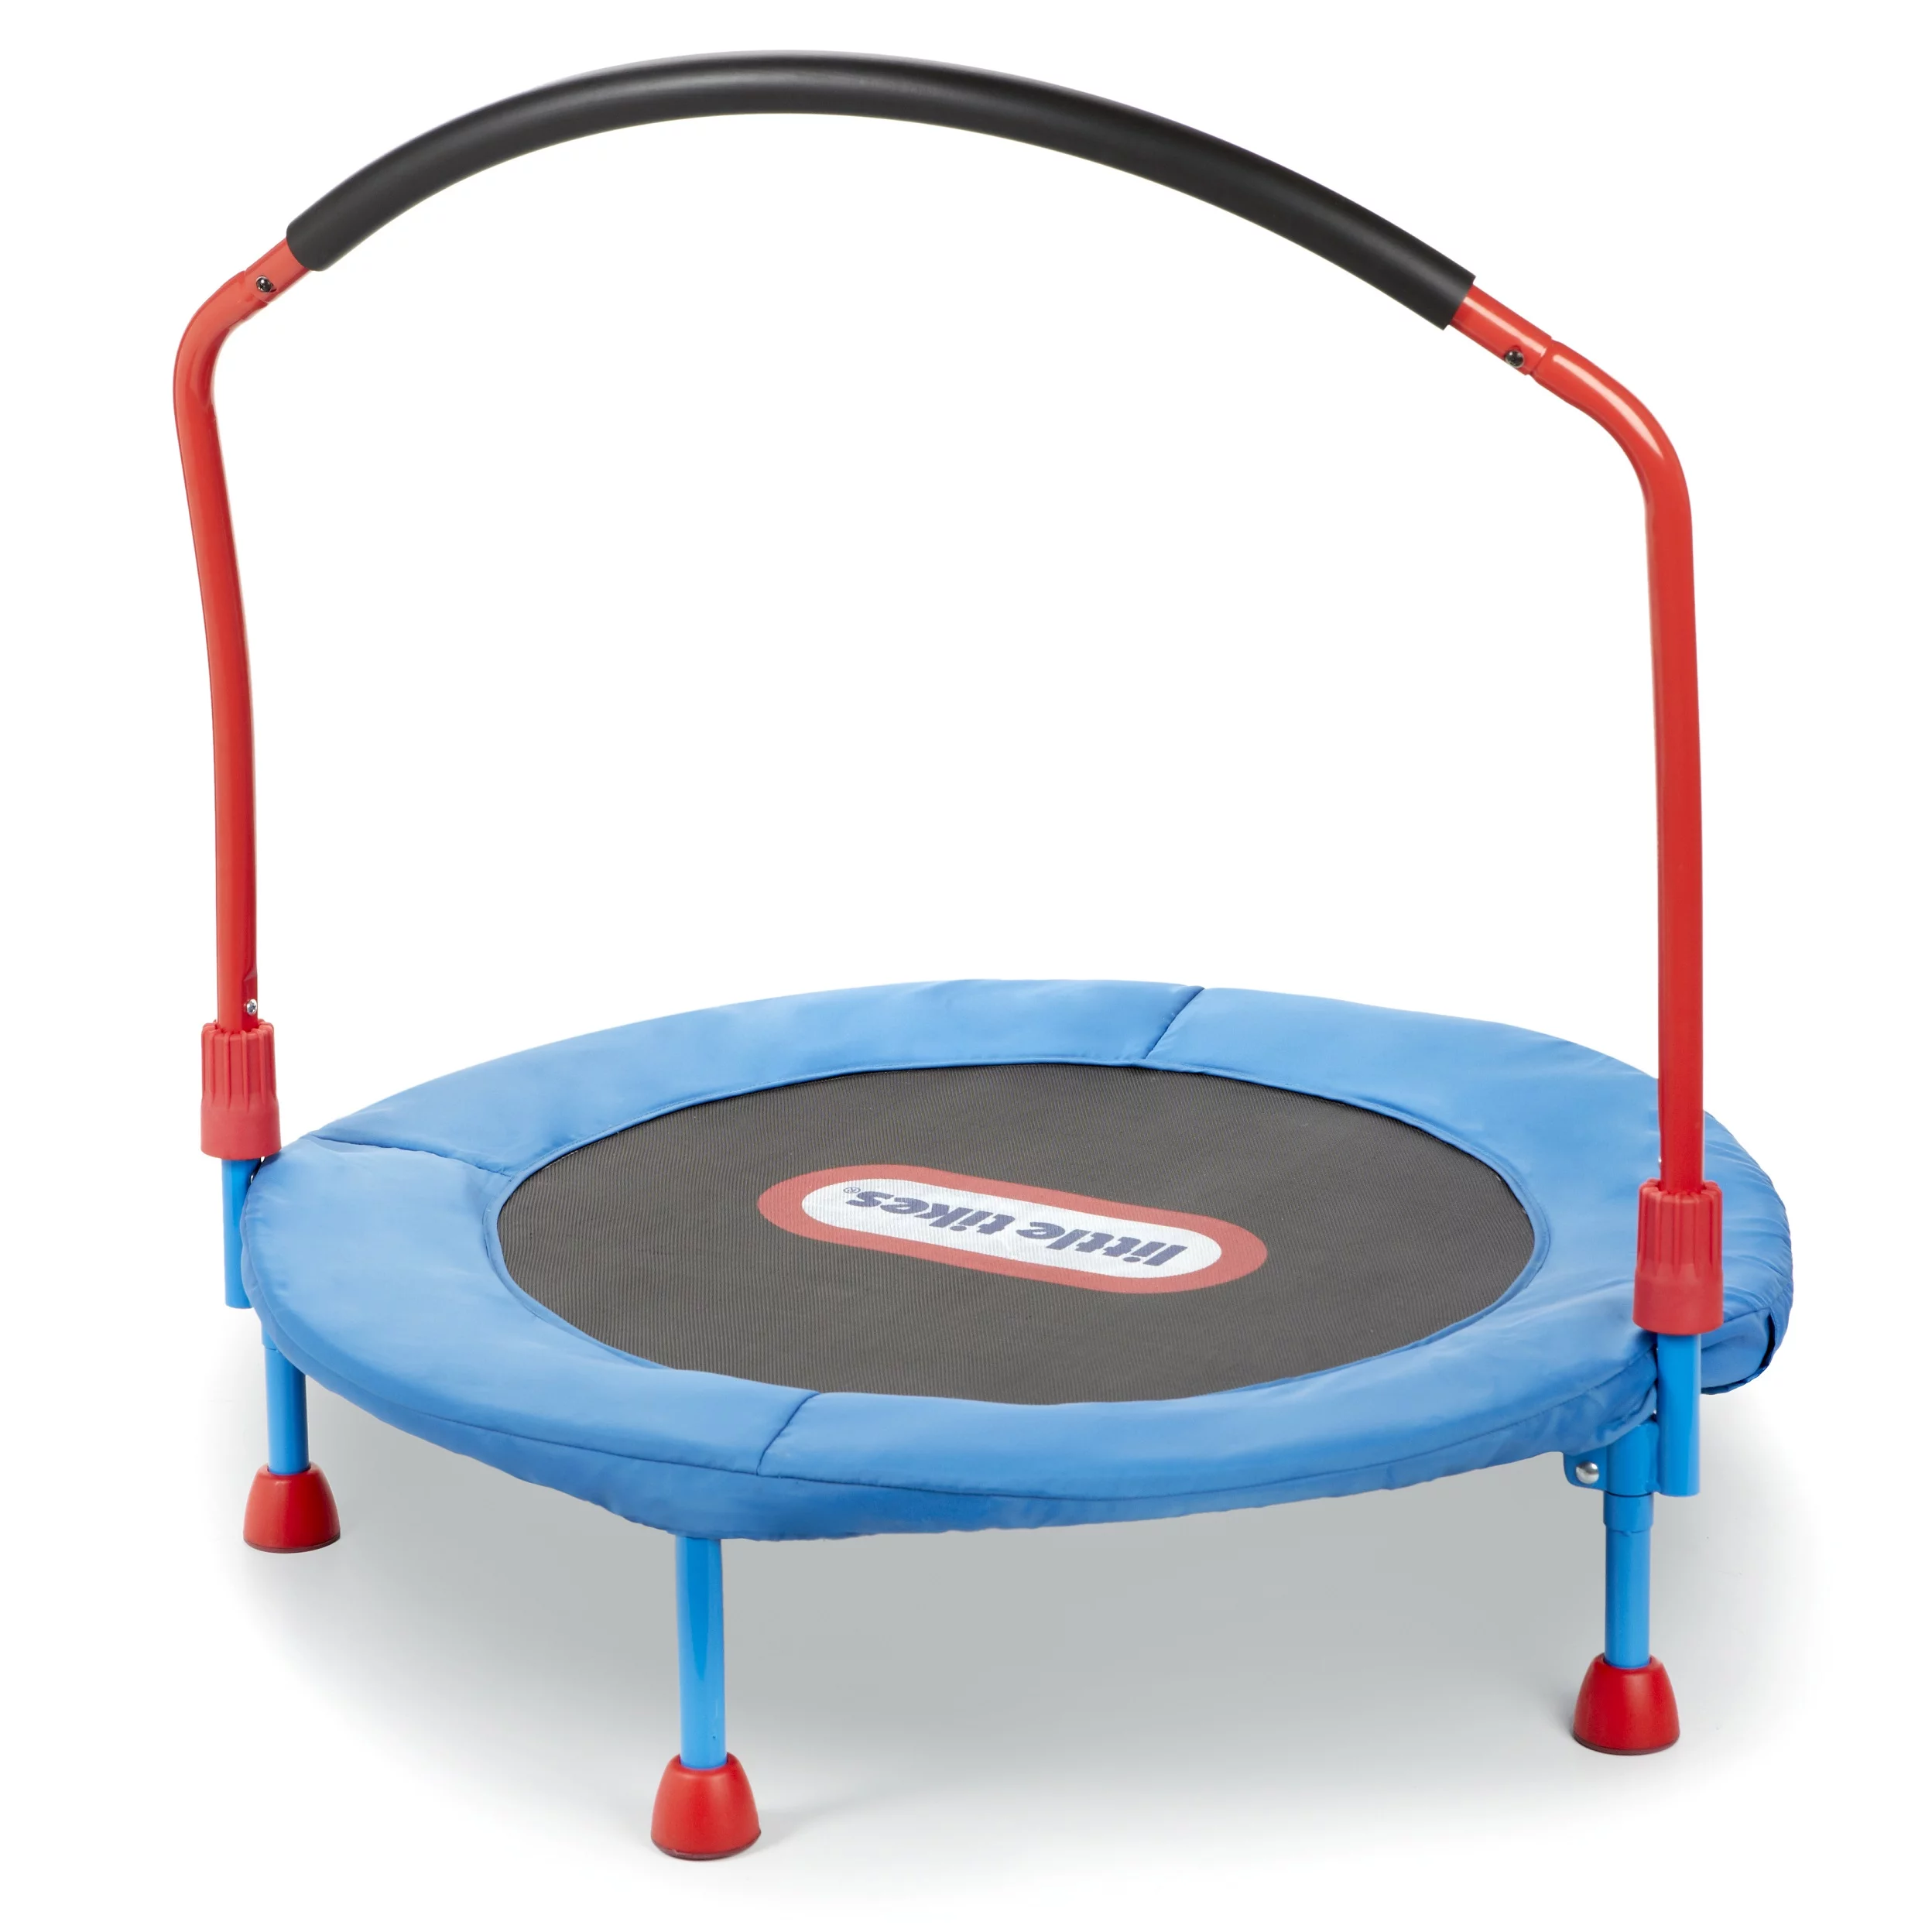 Little Tikes Easy Store 3-Foot Trampoline, with Hand Rail, Blue/Red